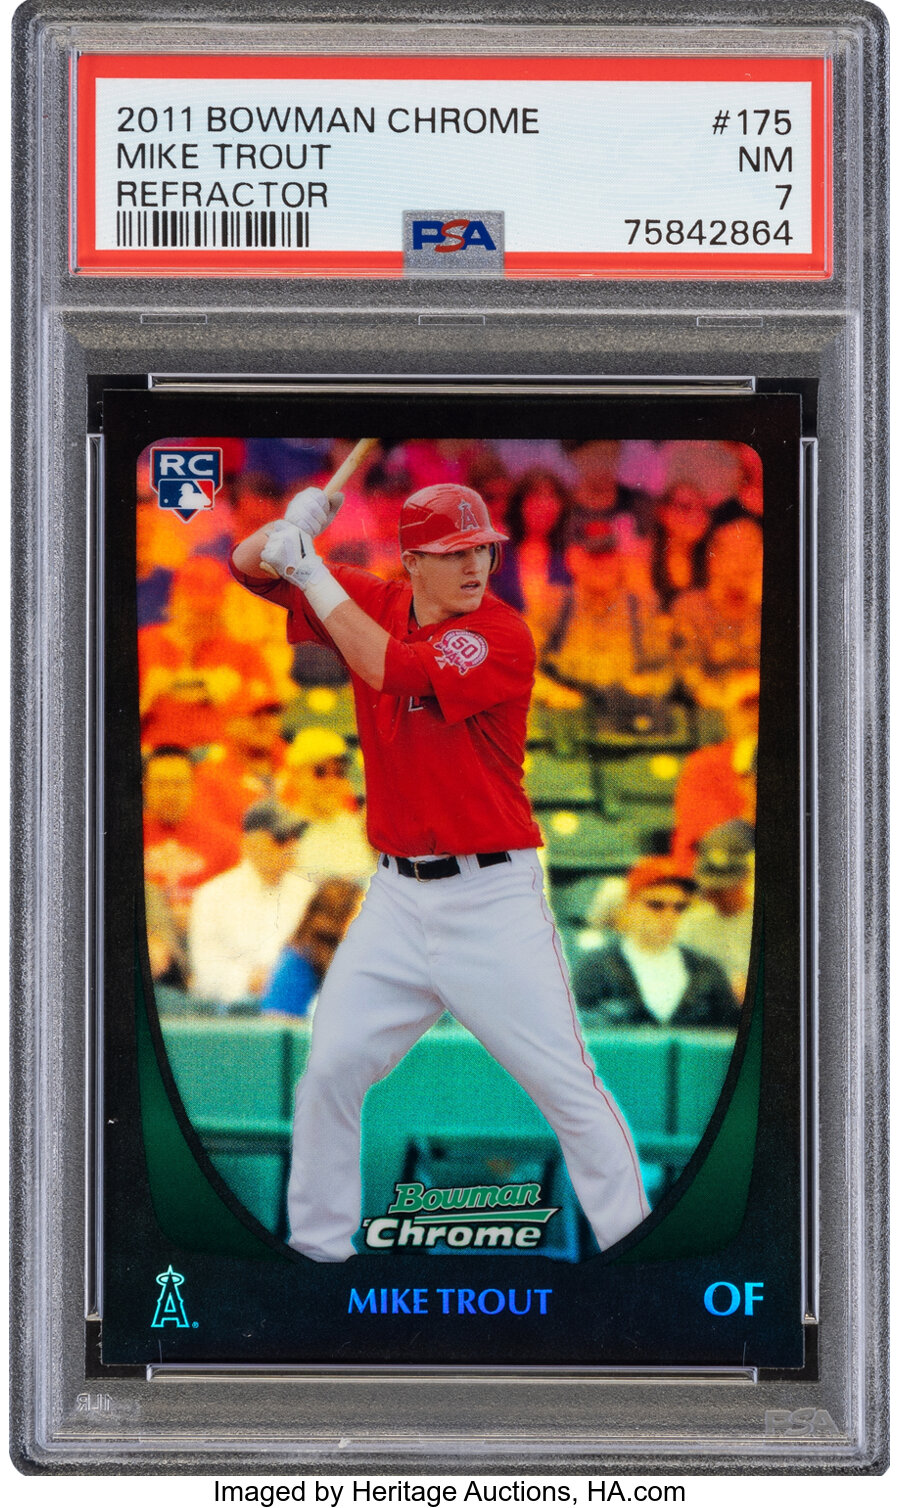 2011 Bowman Chrome Mike Trout (Refractor) Rookie #175 PSA NM 7